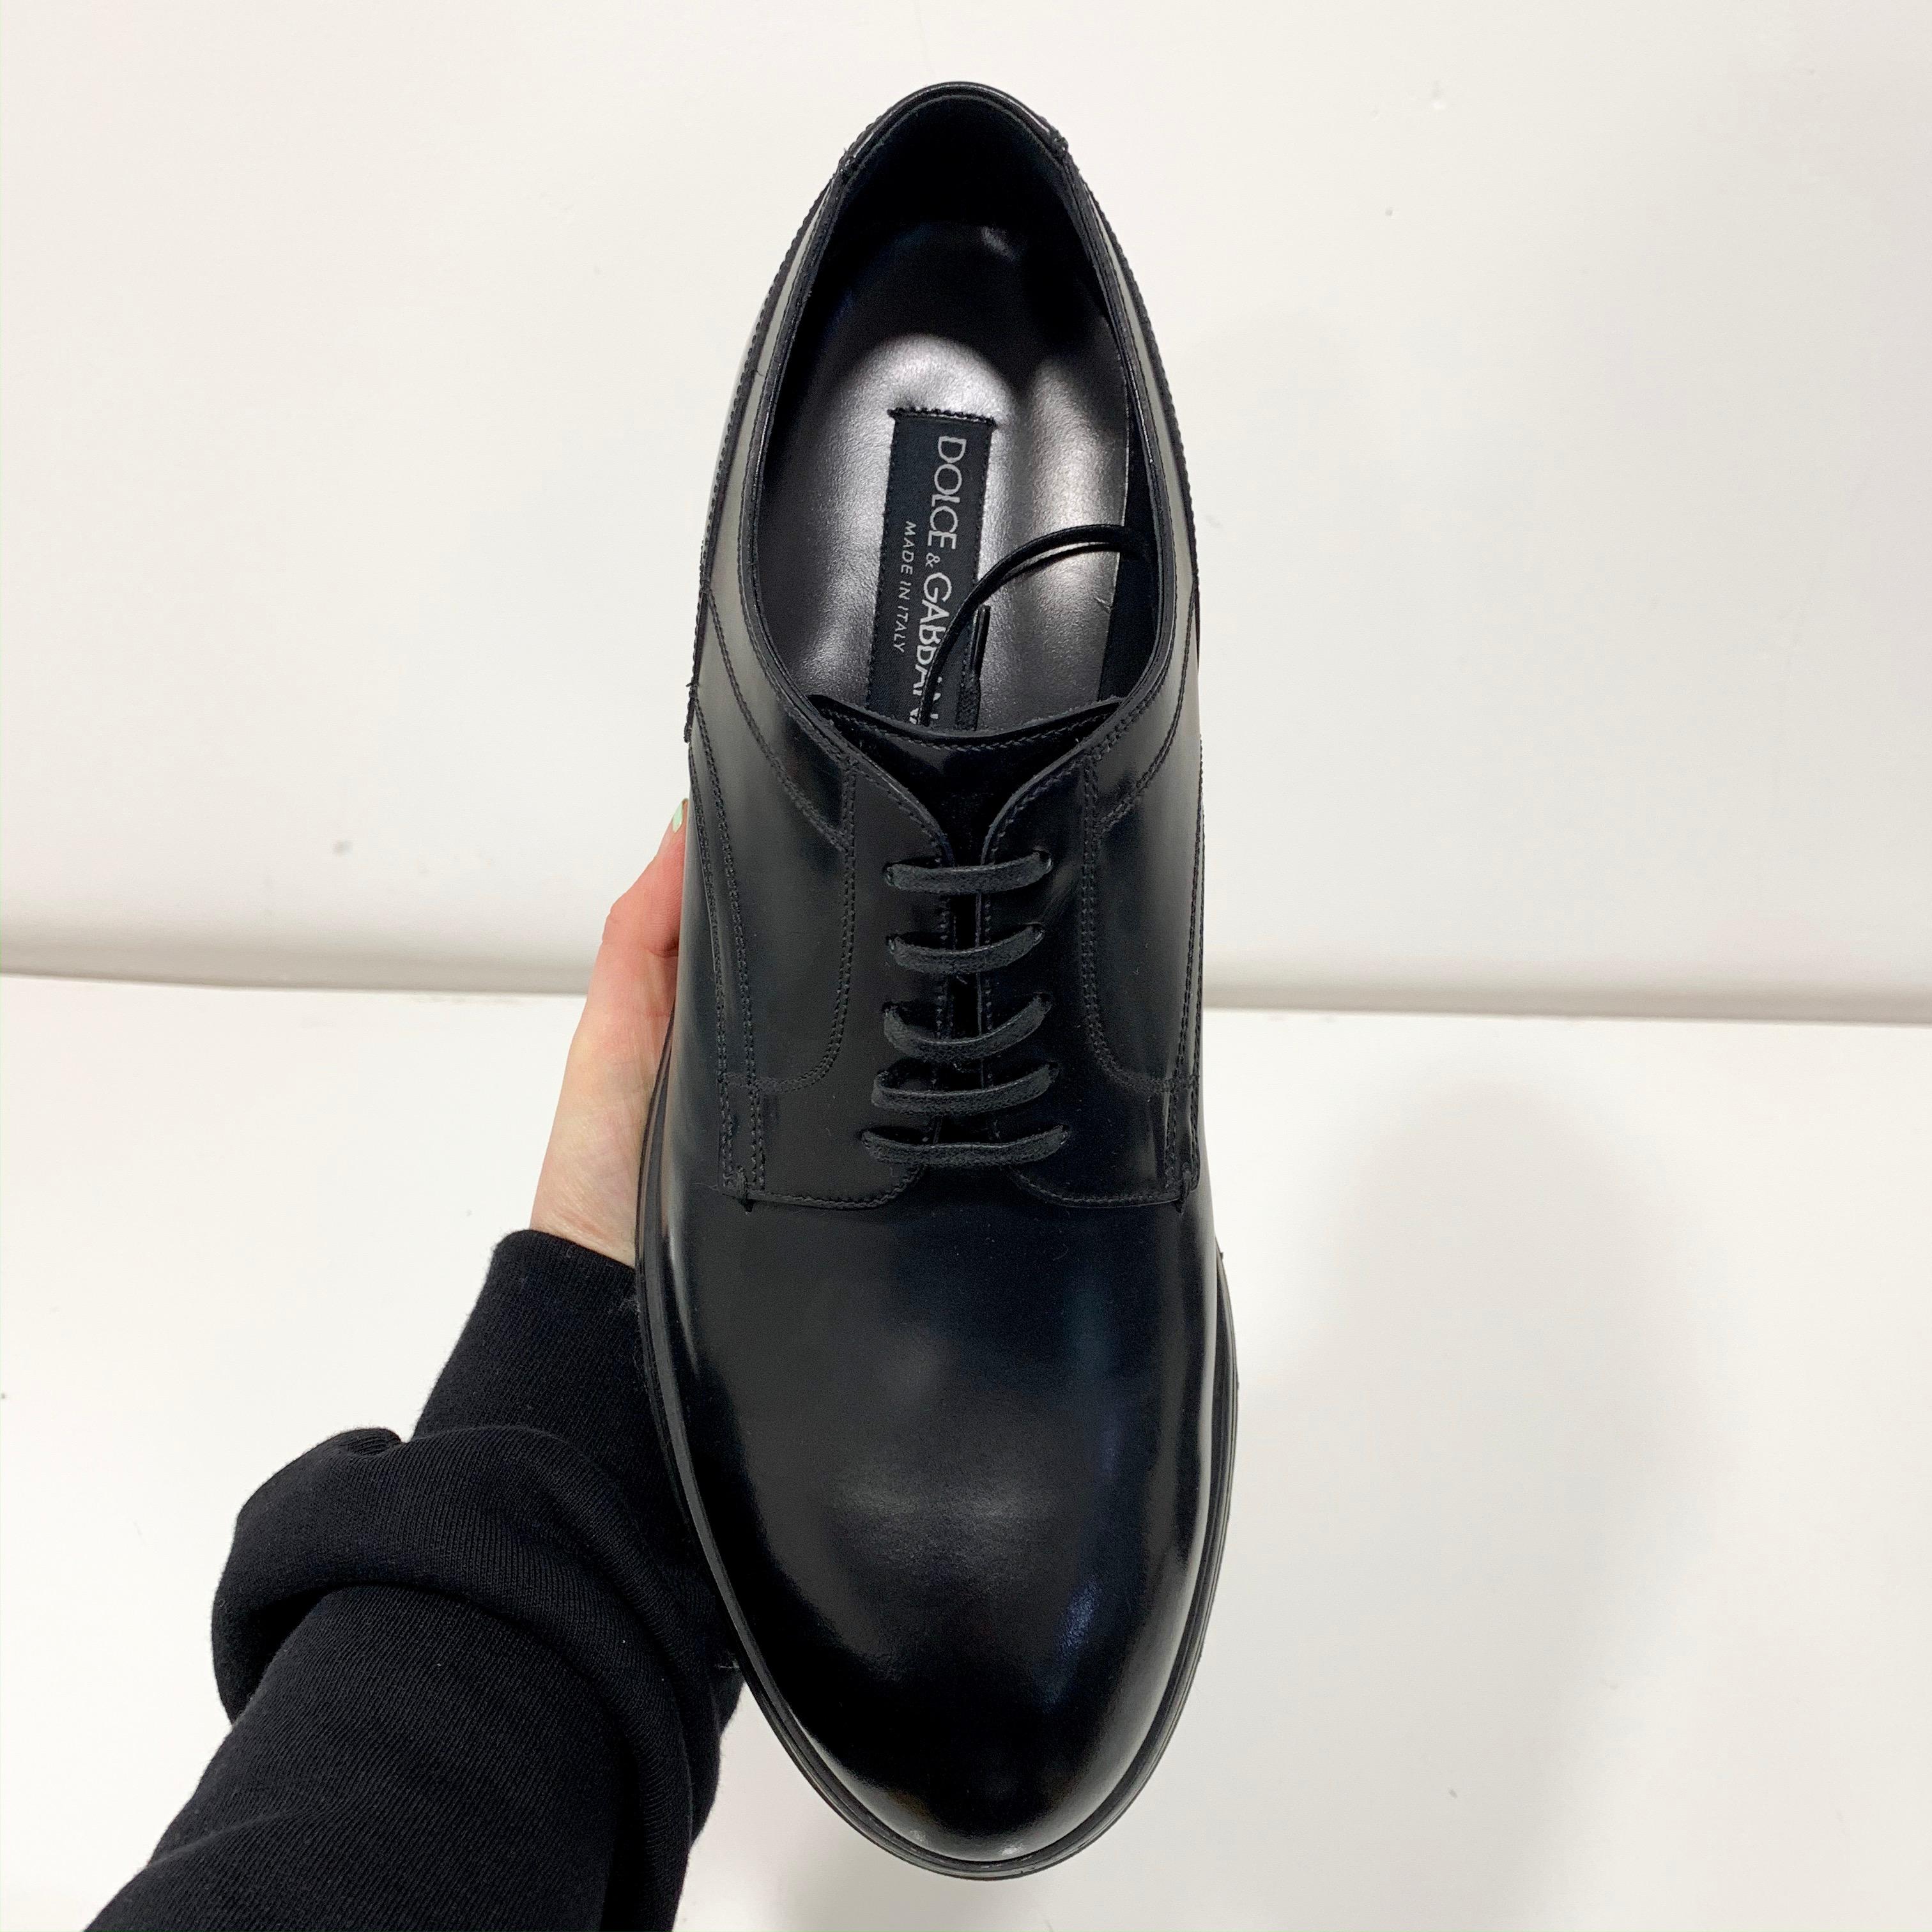 2014 Dolce and Gabbana Men’s Black Leather Shoes 1